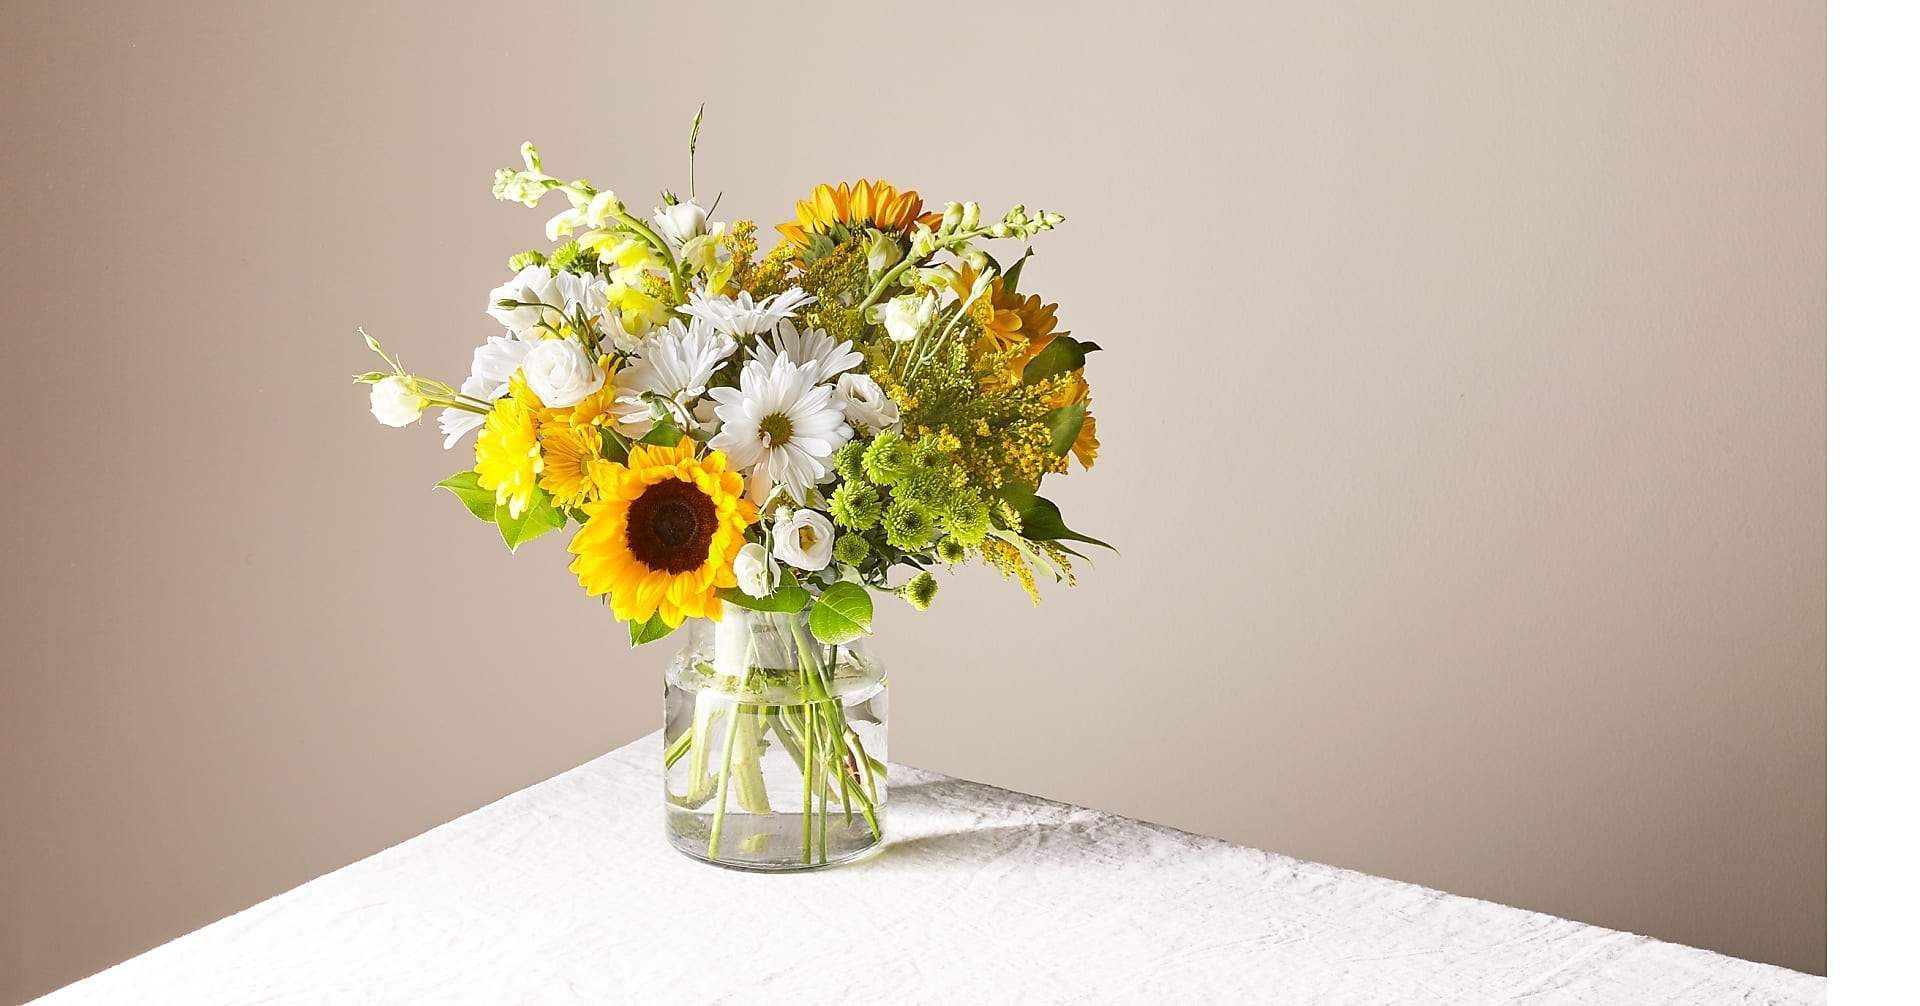 Sympathy Flowers Delivery: Sympathy Bouquets - The Bouqs Co.